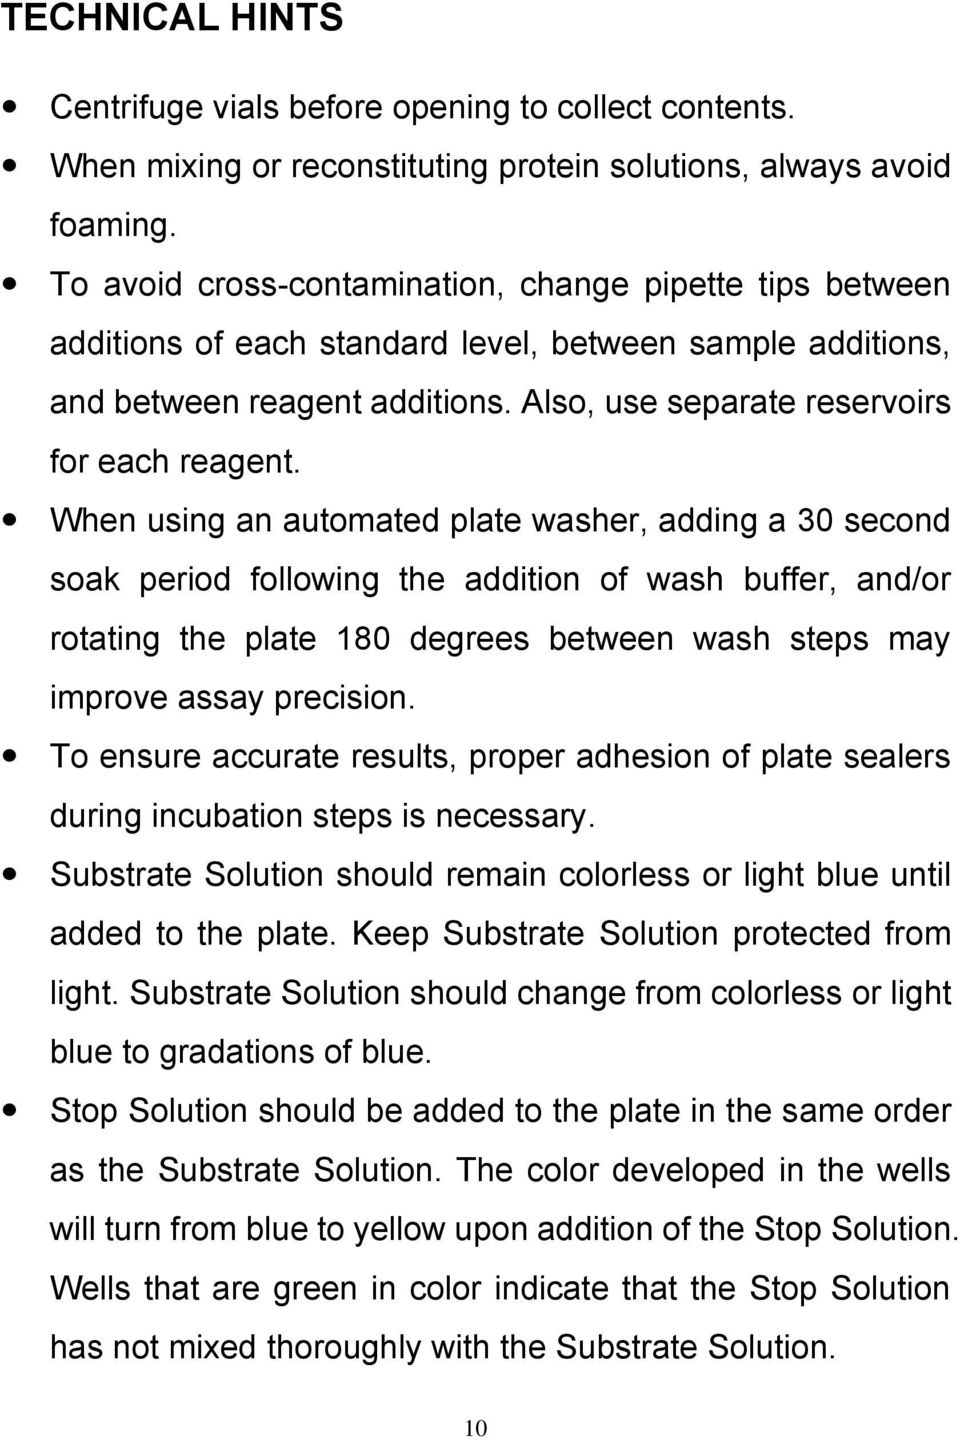 When using an automated plate washer, adding a 30 second soak period following the addition of wash buffer, and/or rotating the plate 180 degrees between wash steps may improve assay precision.